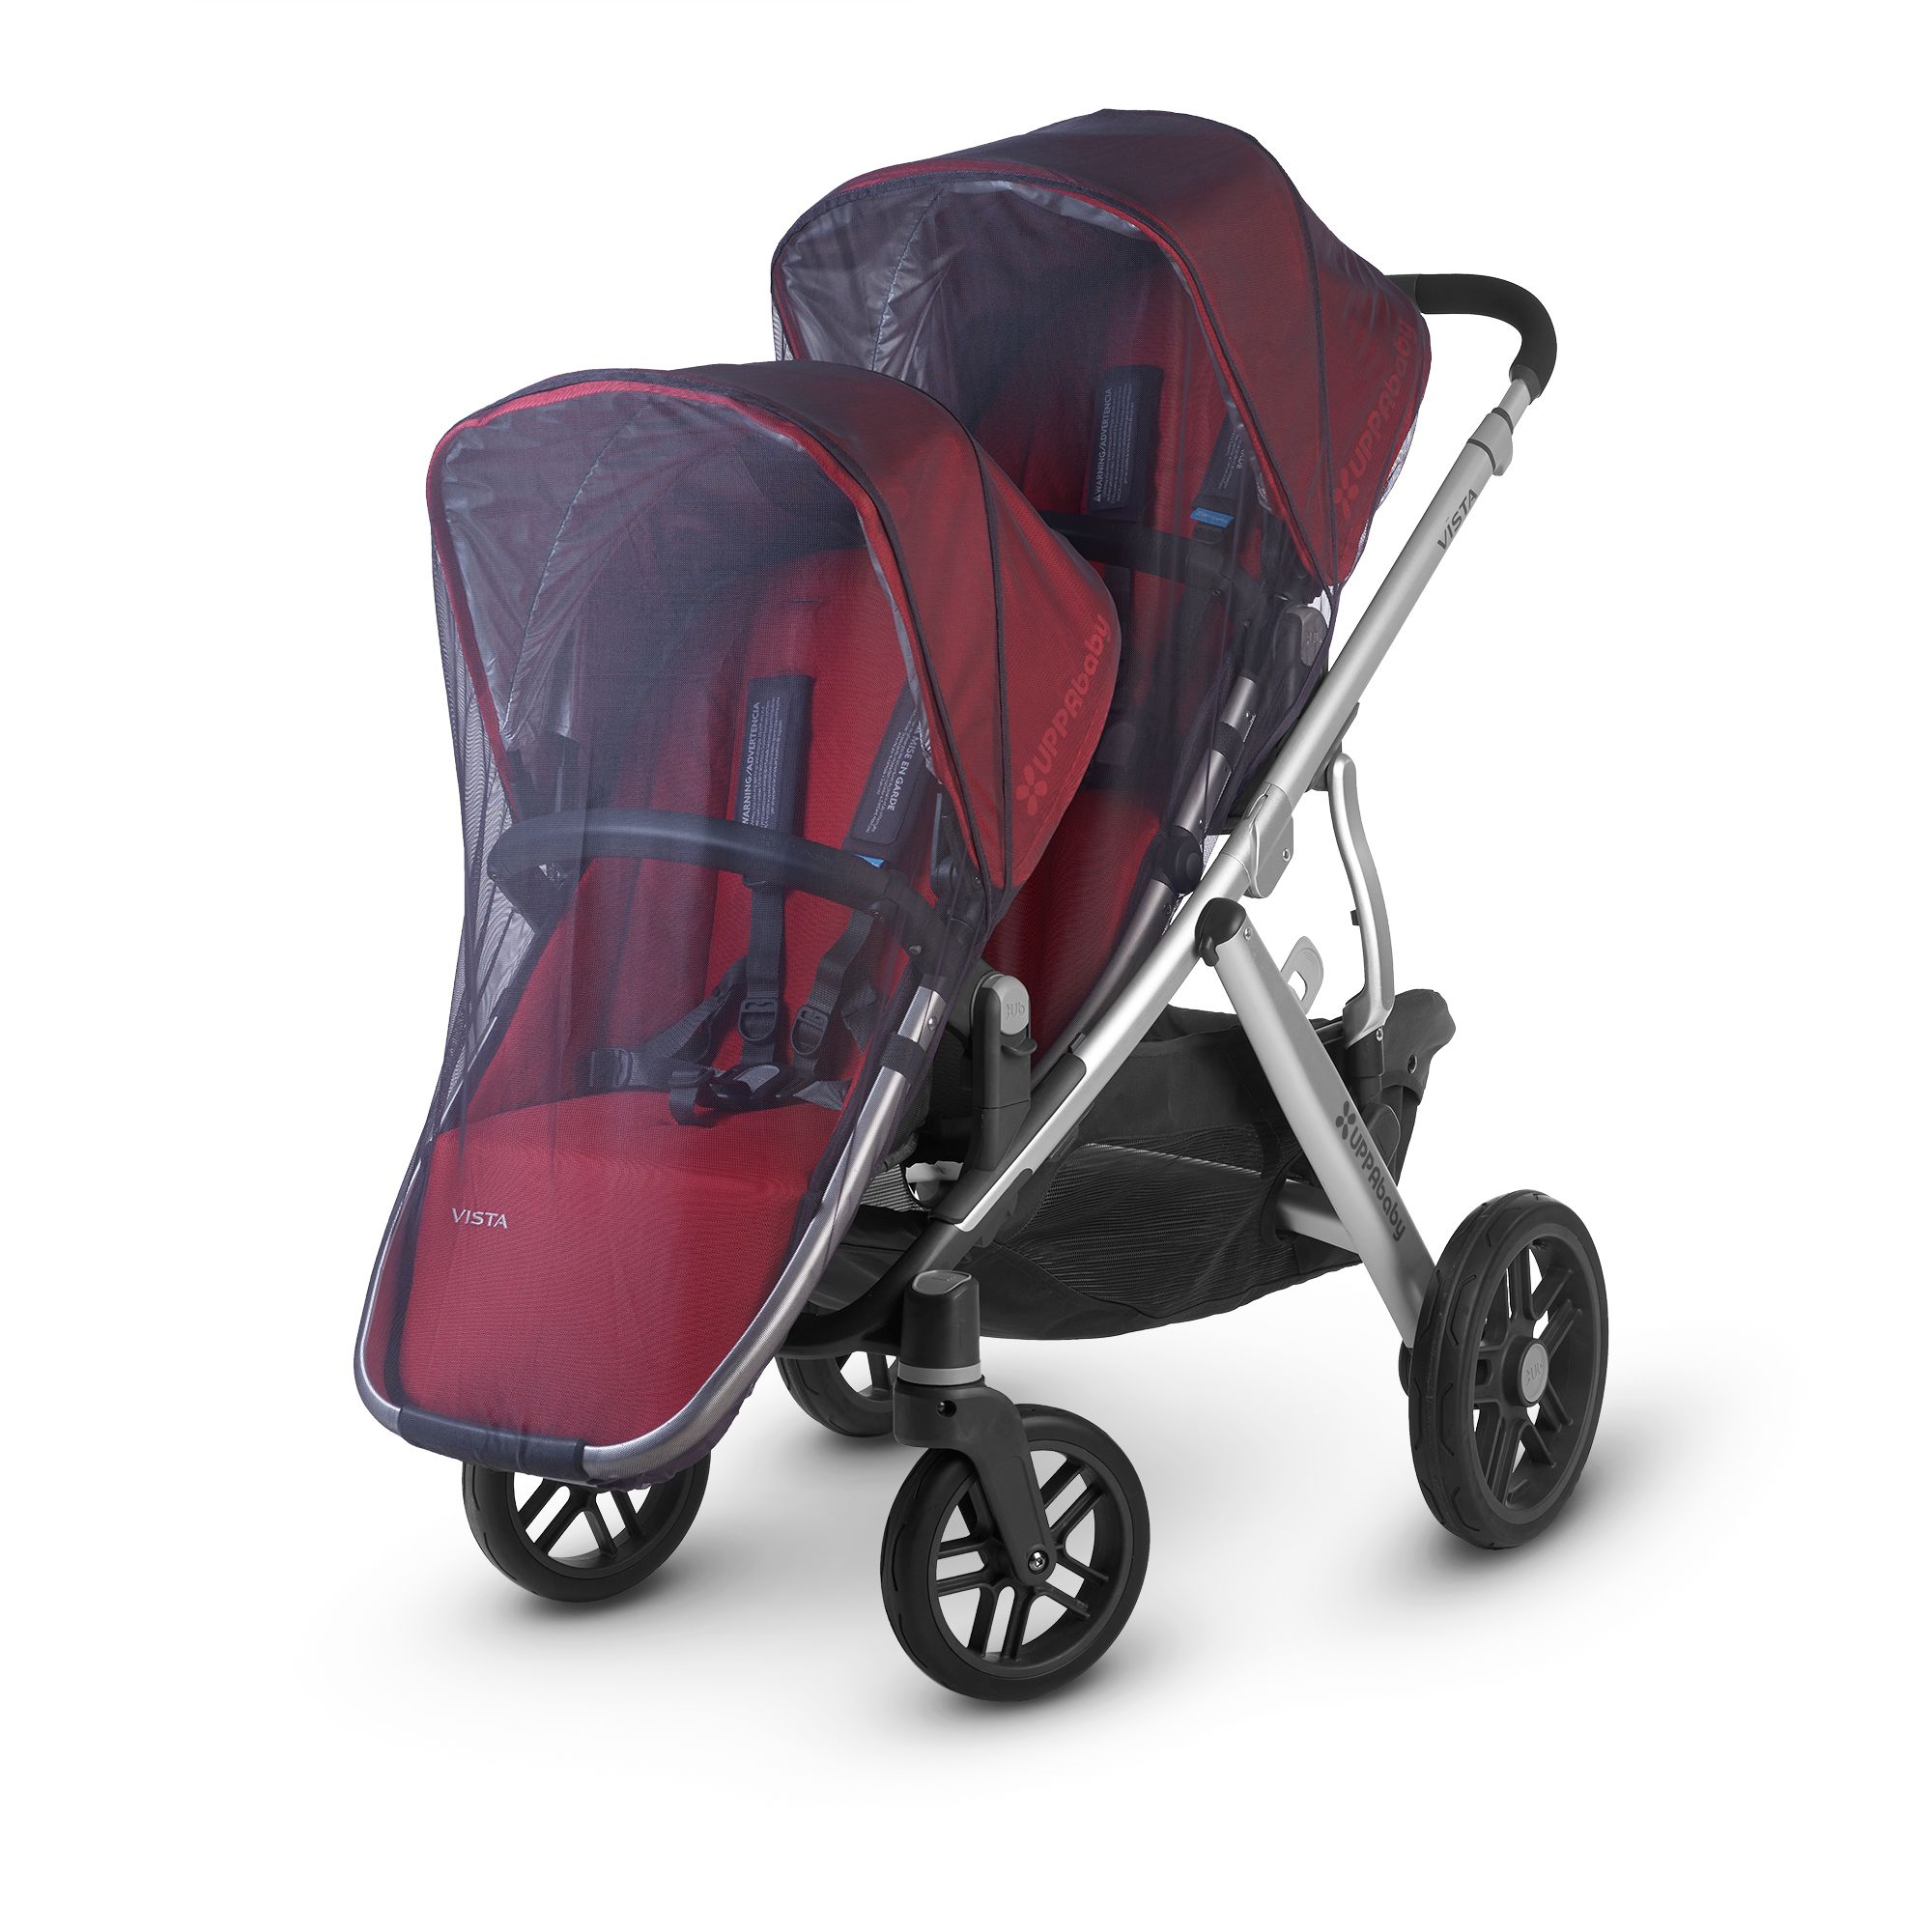 mosquito net for uppababy vista